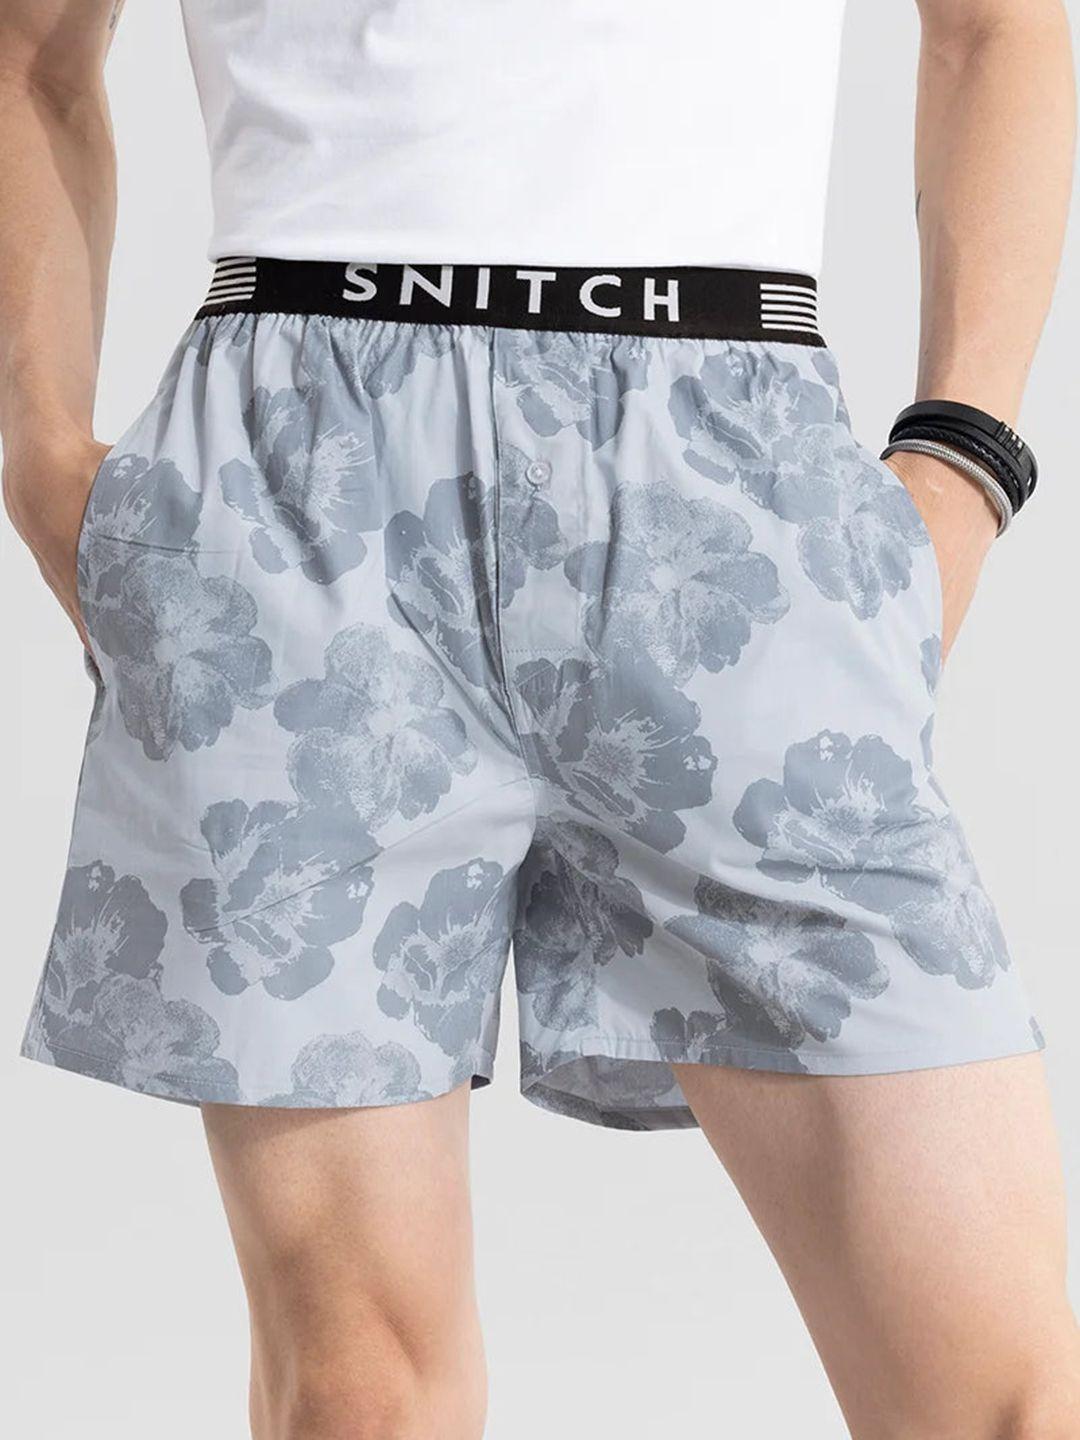 snitch blue printed cotton outer elastic boxers 4msbx9217-04-s